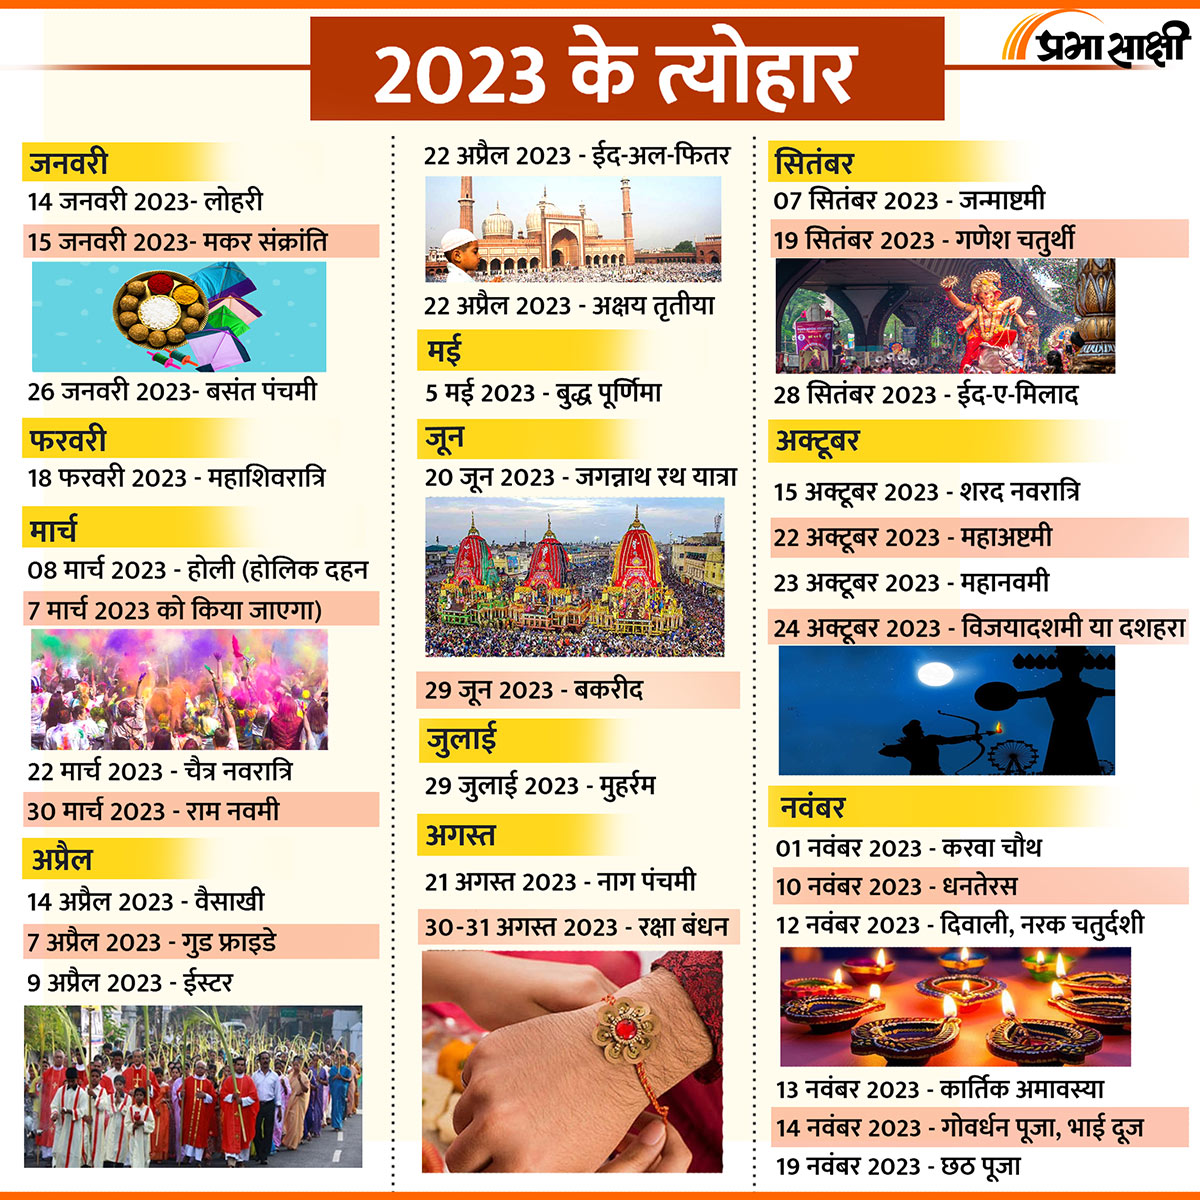 List of Festivals in 2023